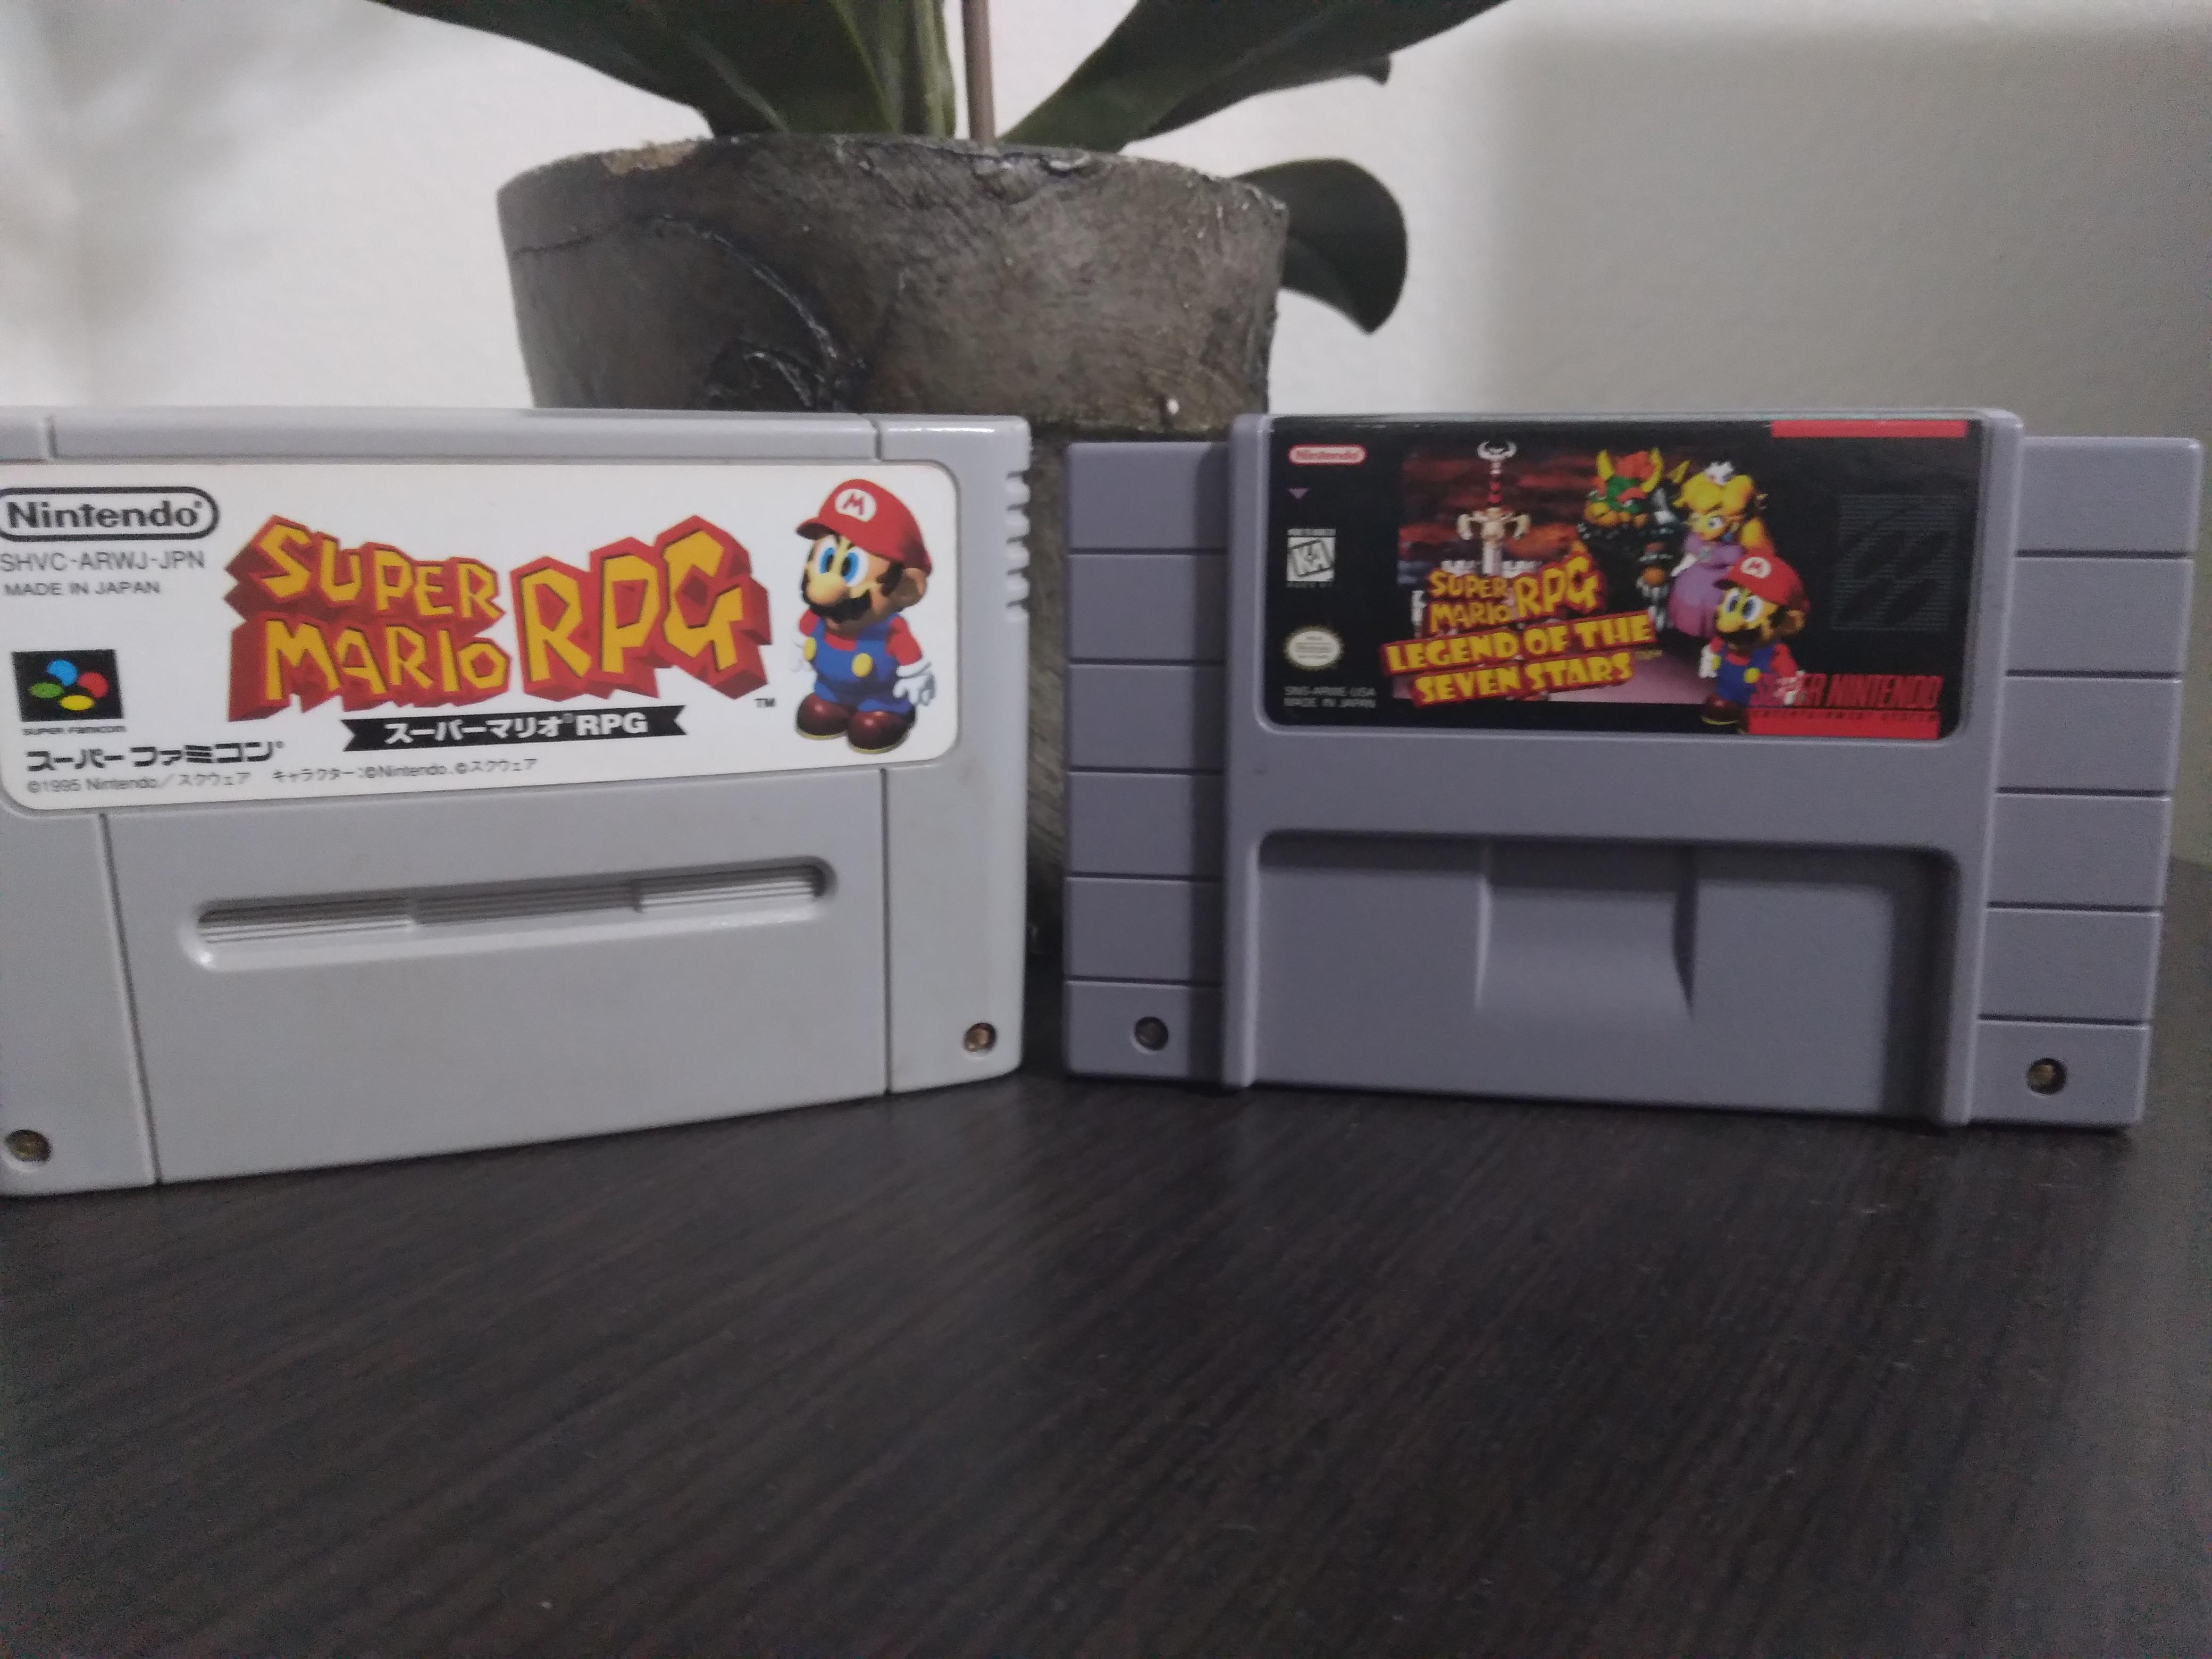 Japanese and American SNES cartridge, respectively.